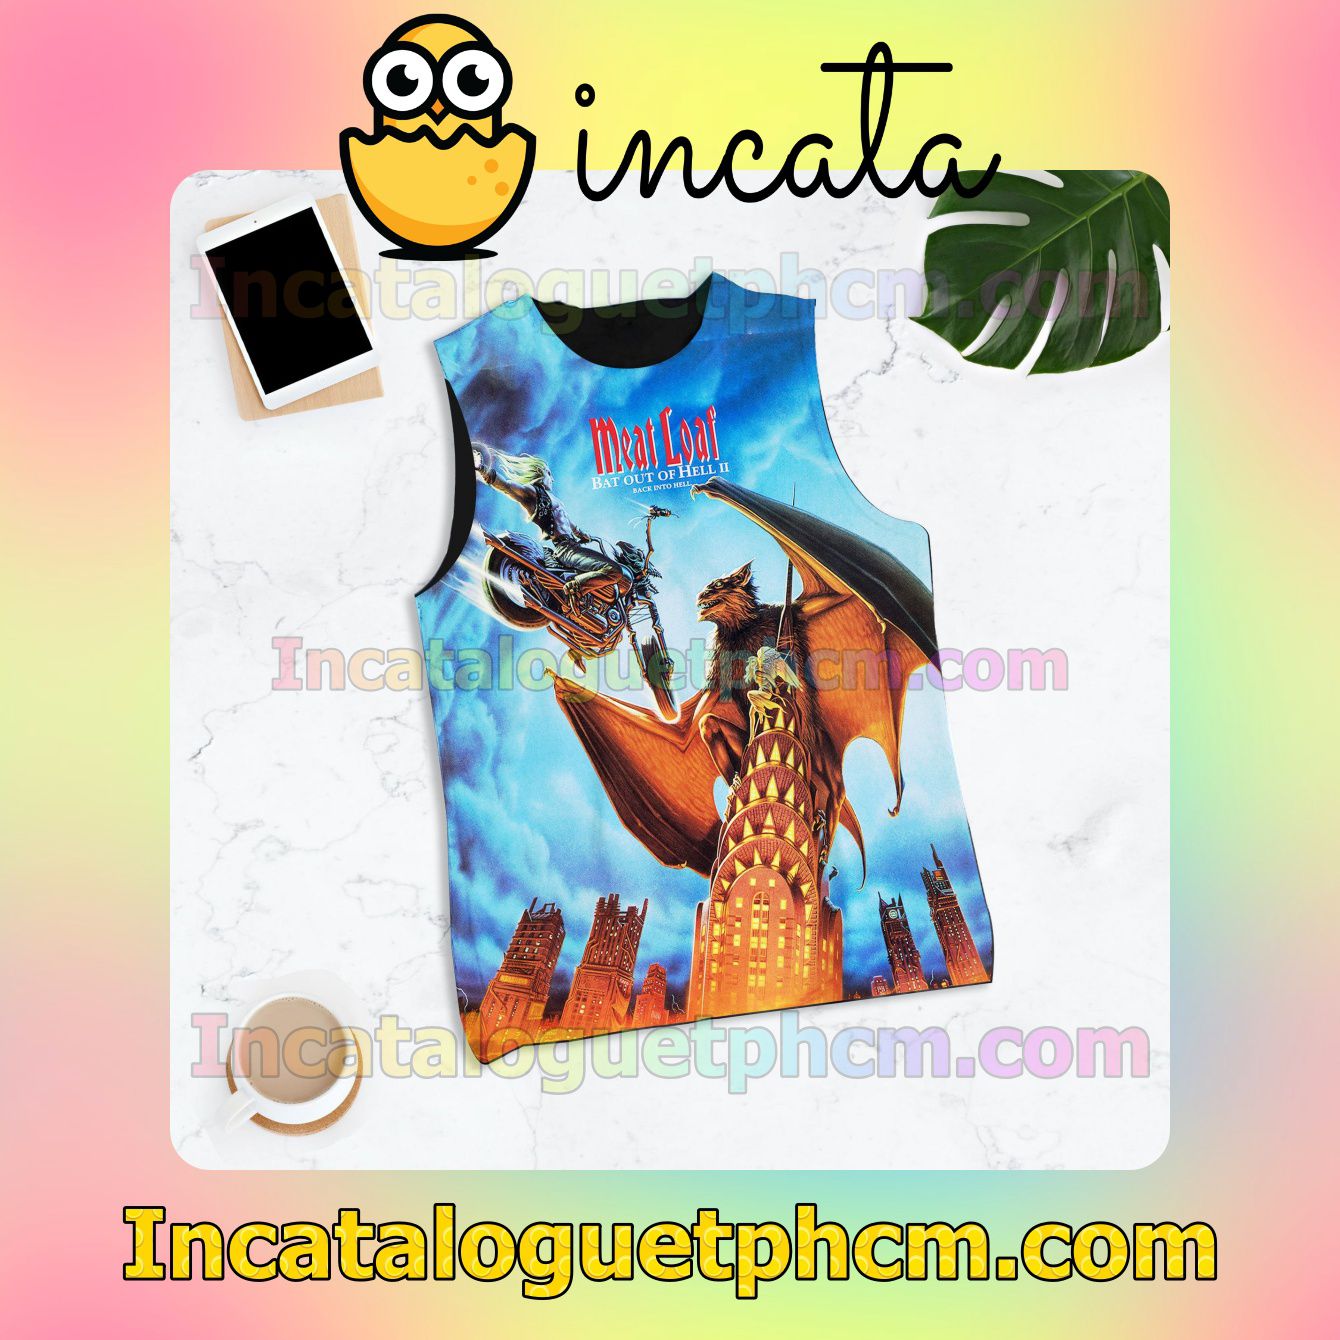 Meat Loaf Bat Out Of Hell II Back Into Hell Album Cover Sleeveless Racer Back Tank Tops